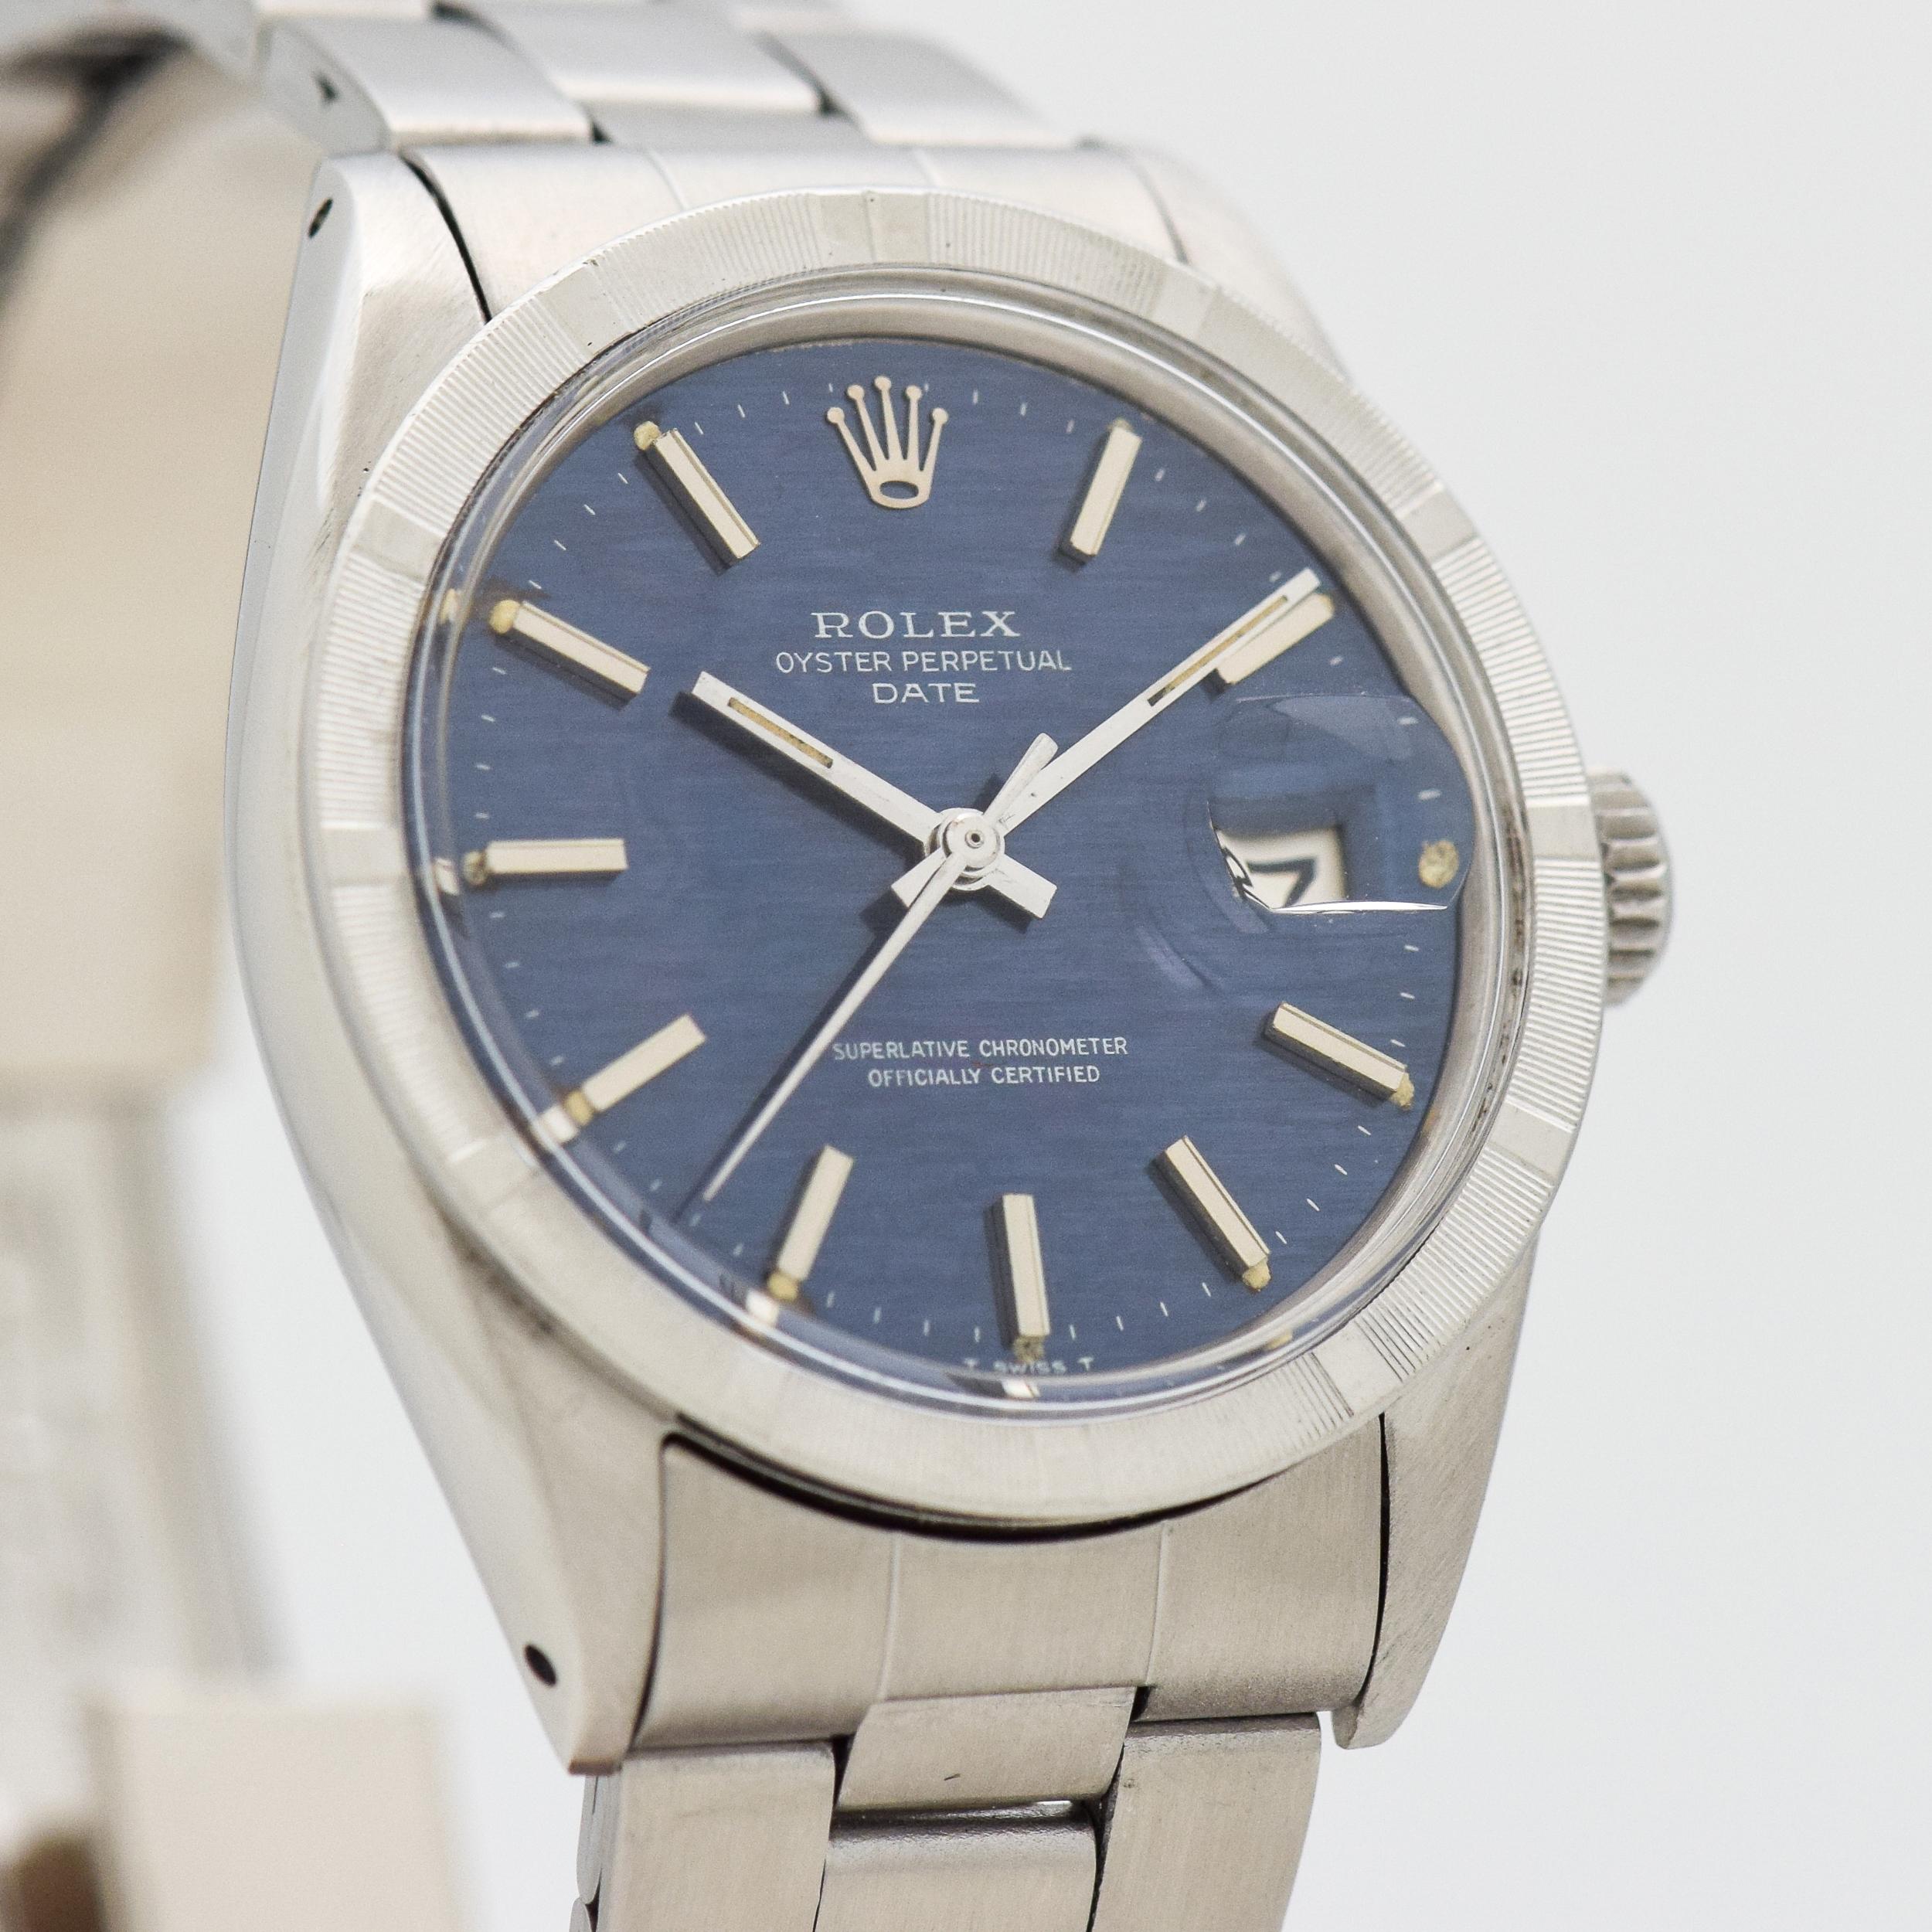 1969 Vintage Rolex Date Automatic Ref. 1501 Stainless Steel watch with Machined Bezel with Rare Original Linen Textured Blue Dial with Applied Steel Bar/Baton Markers with Black Inlay with Original Rolex Stainless Steel Oyster Bracelet. 35mm x 41mm